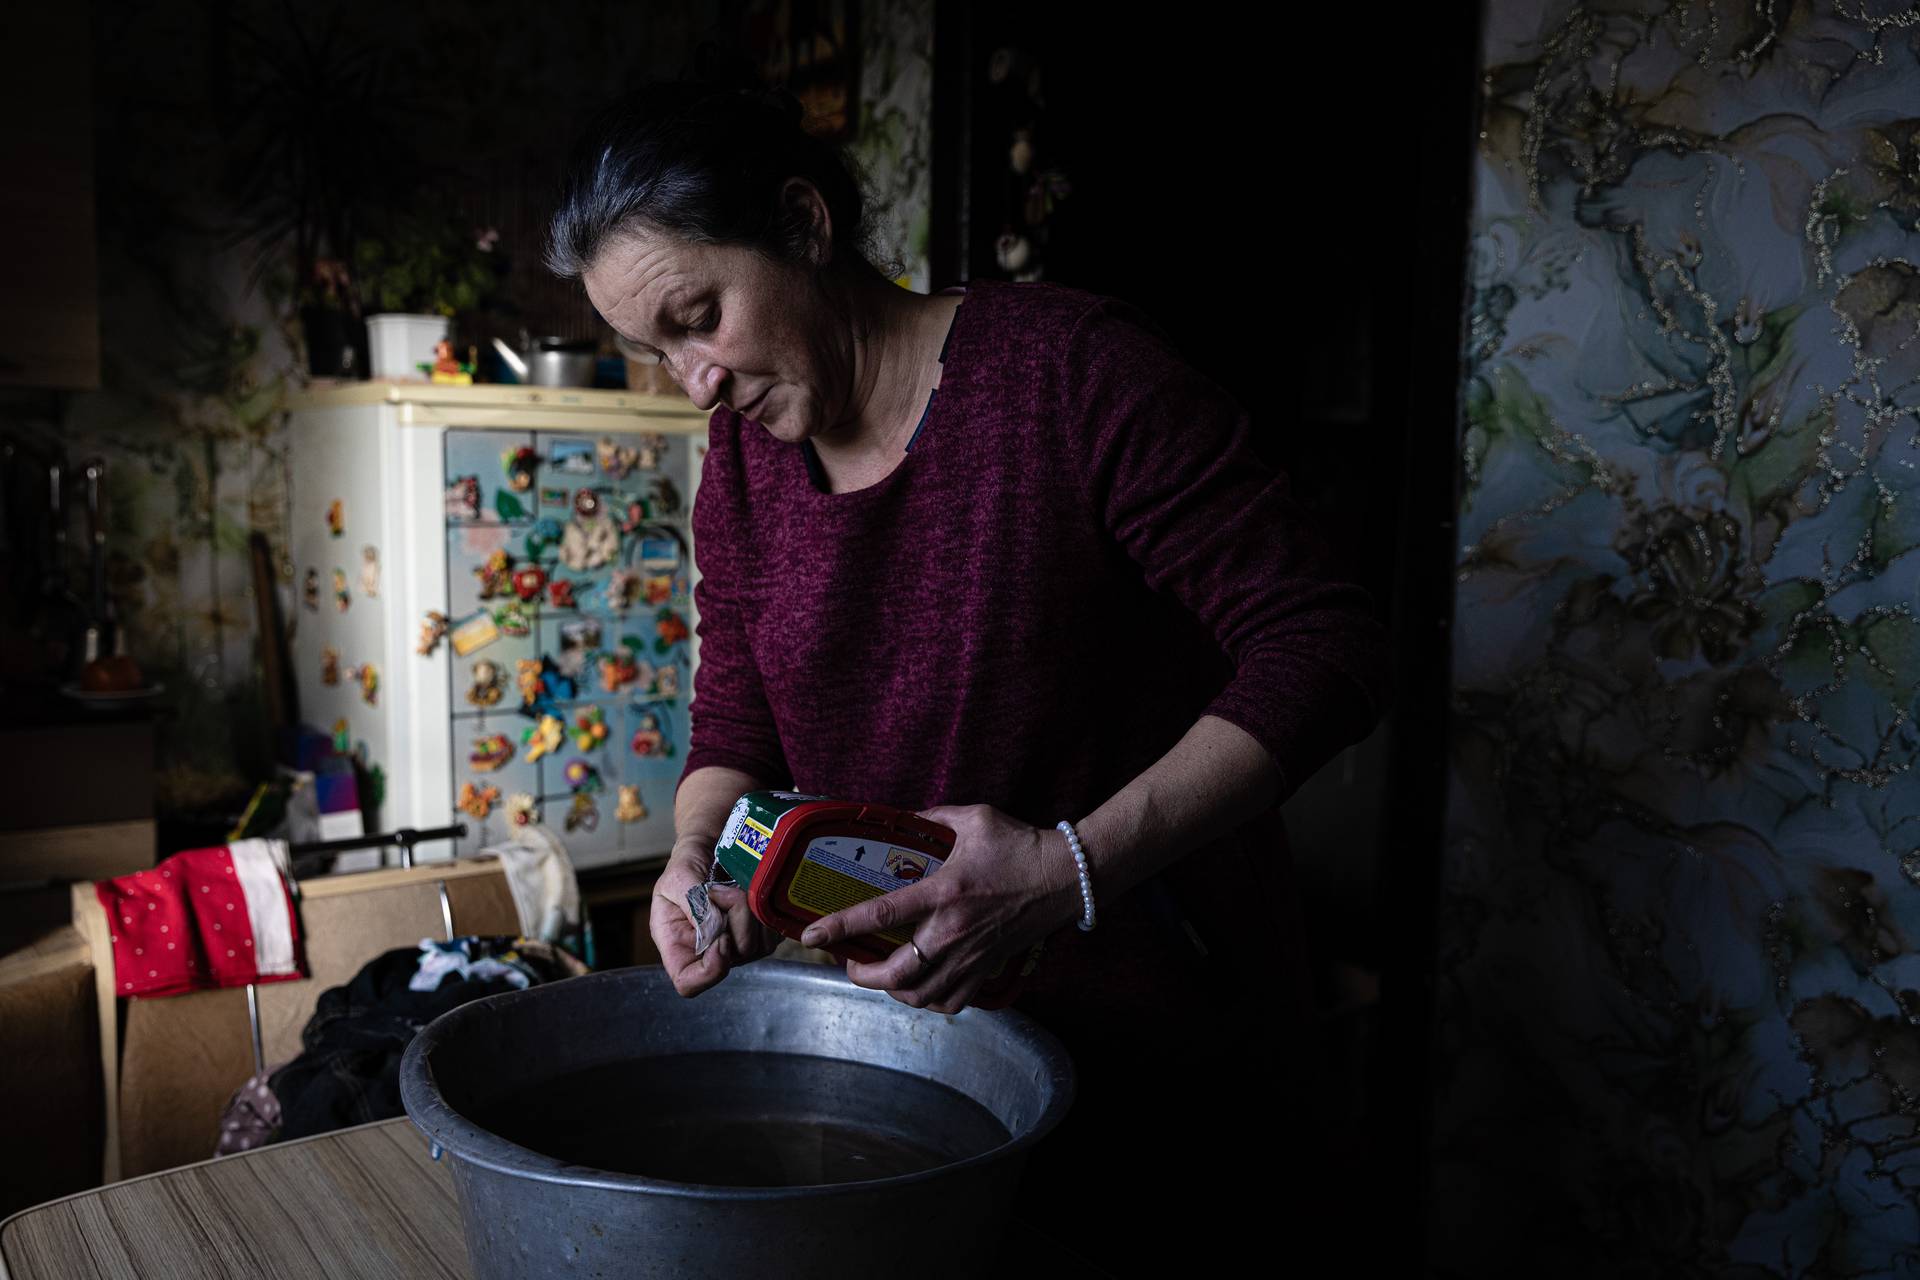 With no electricity, heating or running water, Tatiana collects rainwater to wash the clothes of her and her son